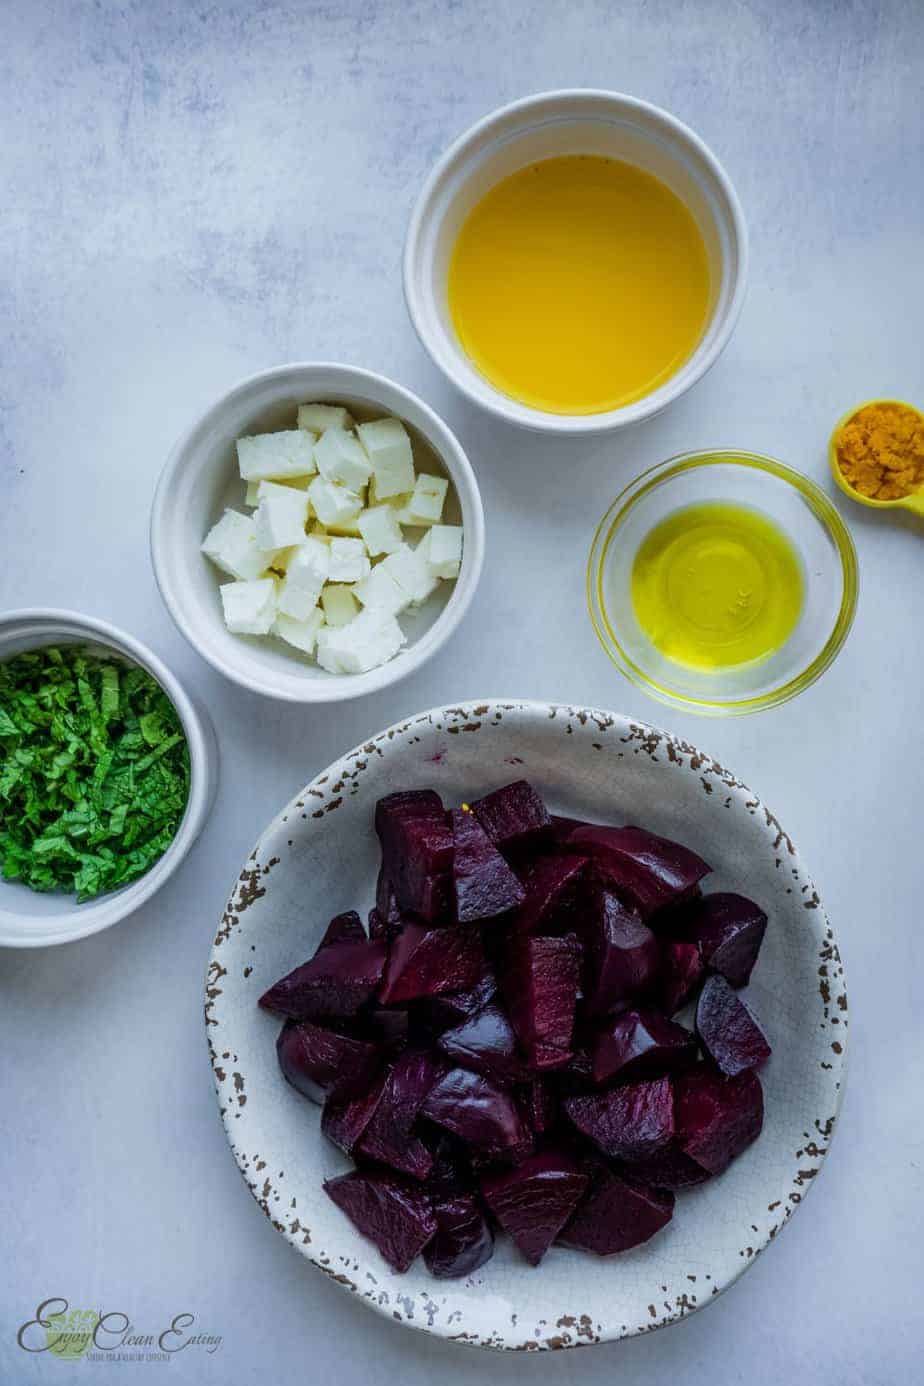 ingredients to make beet salad all measure and in bowls